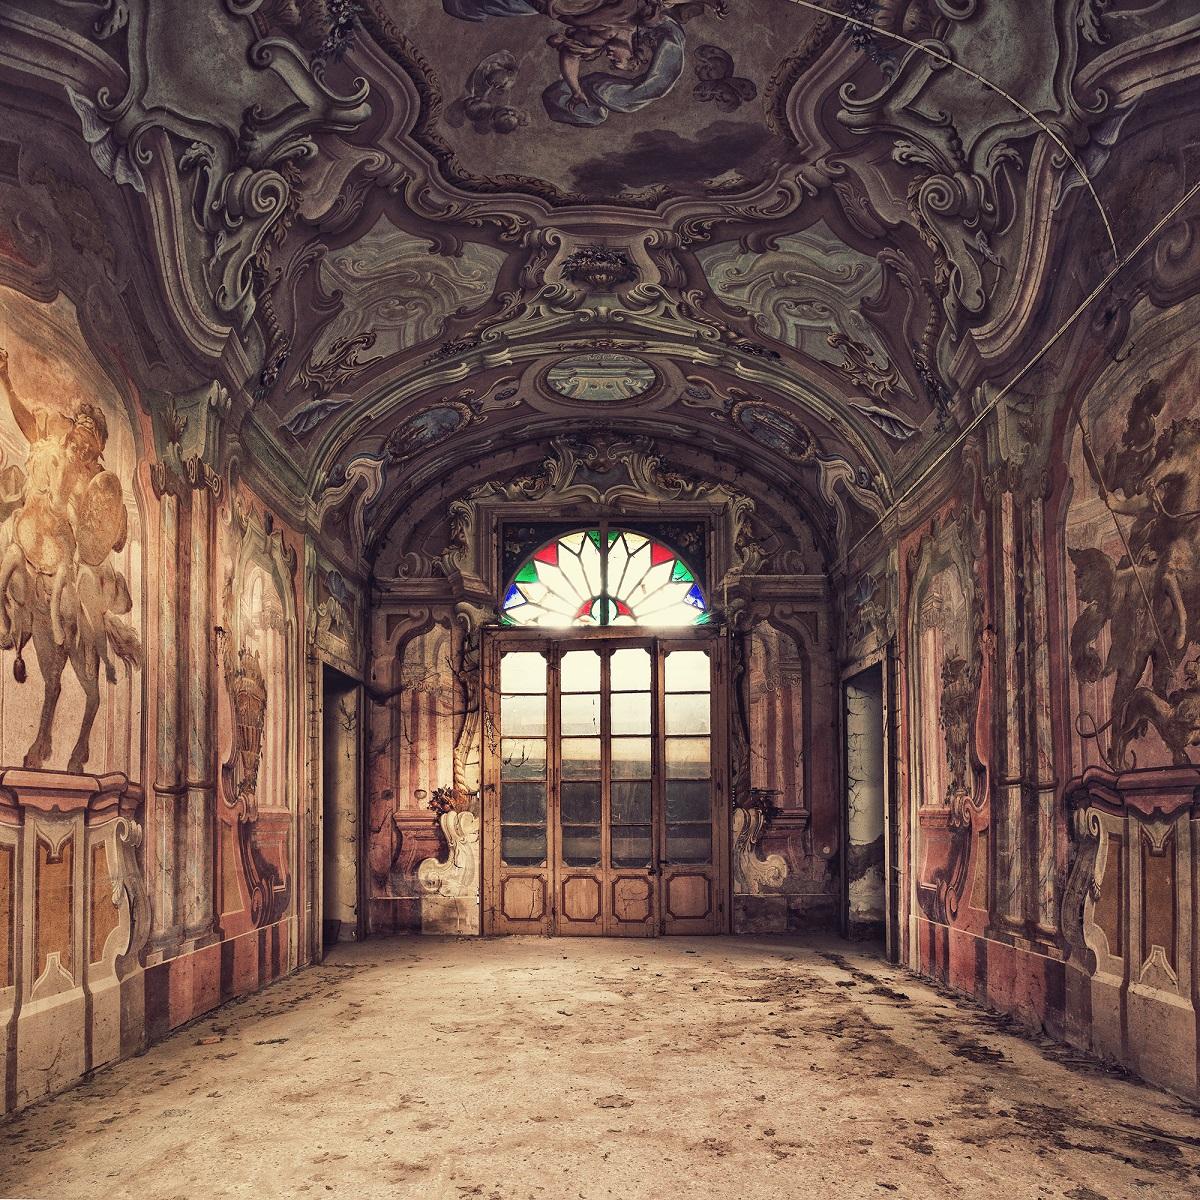 Palazzo by Gina Soden - Photography, interior of abandoned castle, Italy